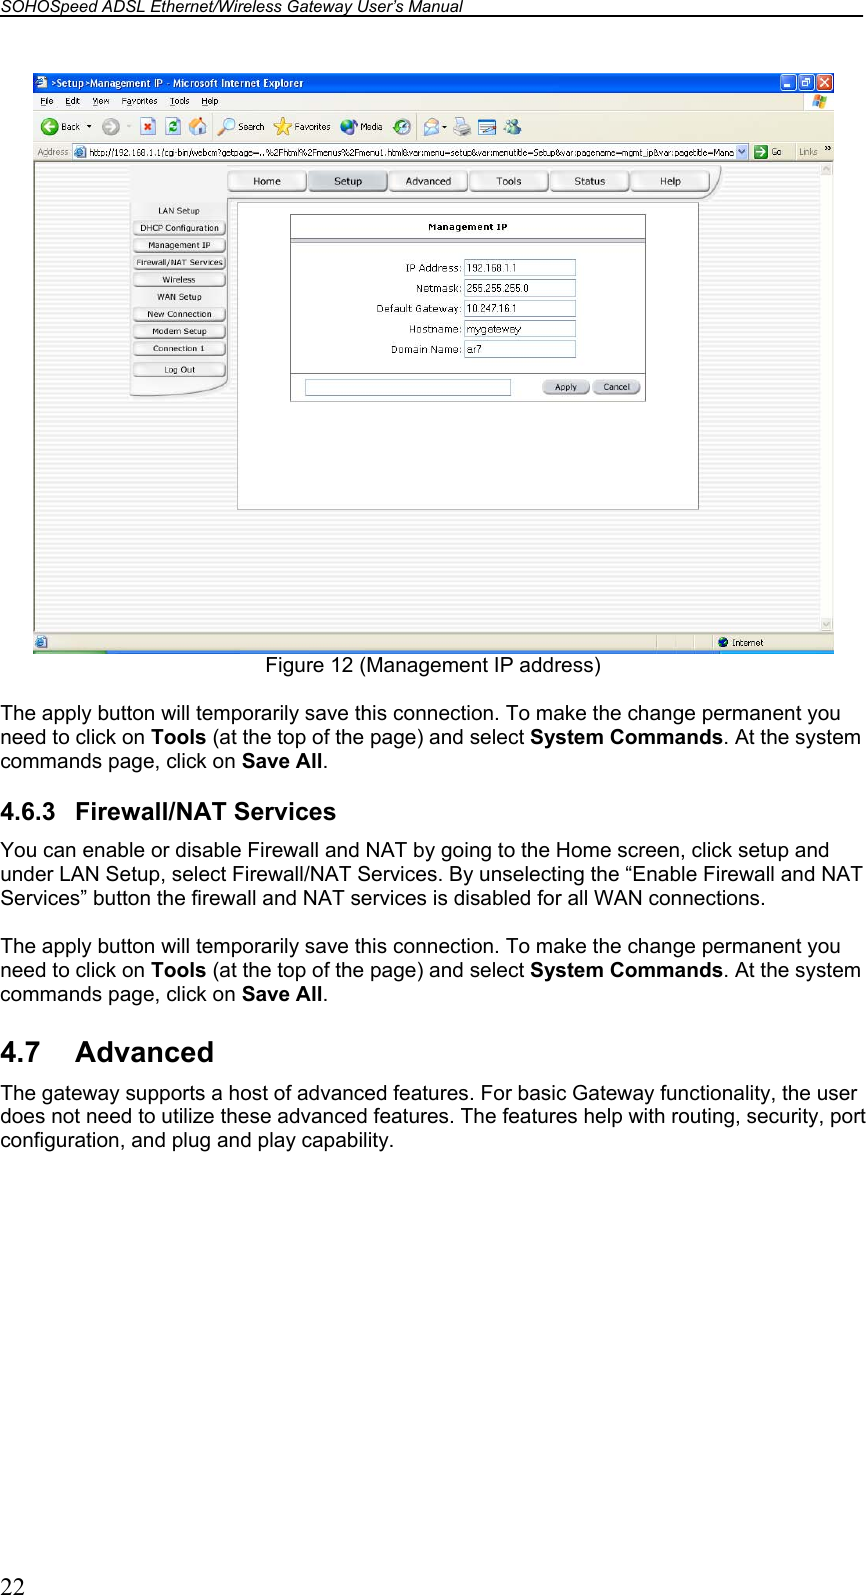 SOHOSpeed ADSL Ethernet/Wireless Gateway User’s Manual    22  Figure 12 (Management IP address)  The apply button will temporarily save this connection. To make the change permanent you need to click on Tools (at the top of the page) and select System Commands. At the system commands page, click on Save All.  4.6.3 Firewall/NAT Services You can enable or disable Firewall and NAT by going to the Home screen, click setup and under LAN Setup, select Firewall/NAT Services. By unselecting the “Enable Firewall and NAT Services” button the firewall and NAT services is disabled for all WAN connections.   The apply button will temporarily save this connection. To make the change permanent you need to click on Tools (at the top of the page) and select System Commands. At the system commands page, click on Save All.  4.7 Advanced The gateway supports a host of advanced features. For basic Gateway functionality, the user does not need to utilize these advanced features. The features help with routing, security, port configuration, and plug and play capability.  